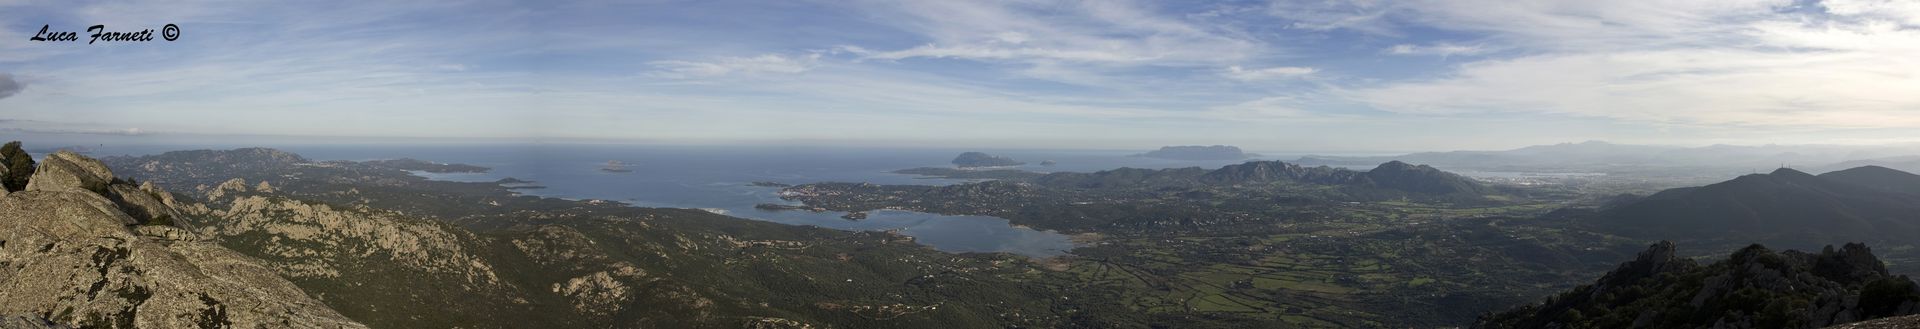 by Luca Farneti - Gulf of Cala di Volpe and Congianus and the Marinella bends